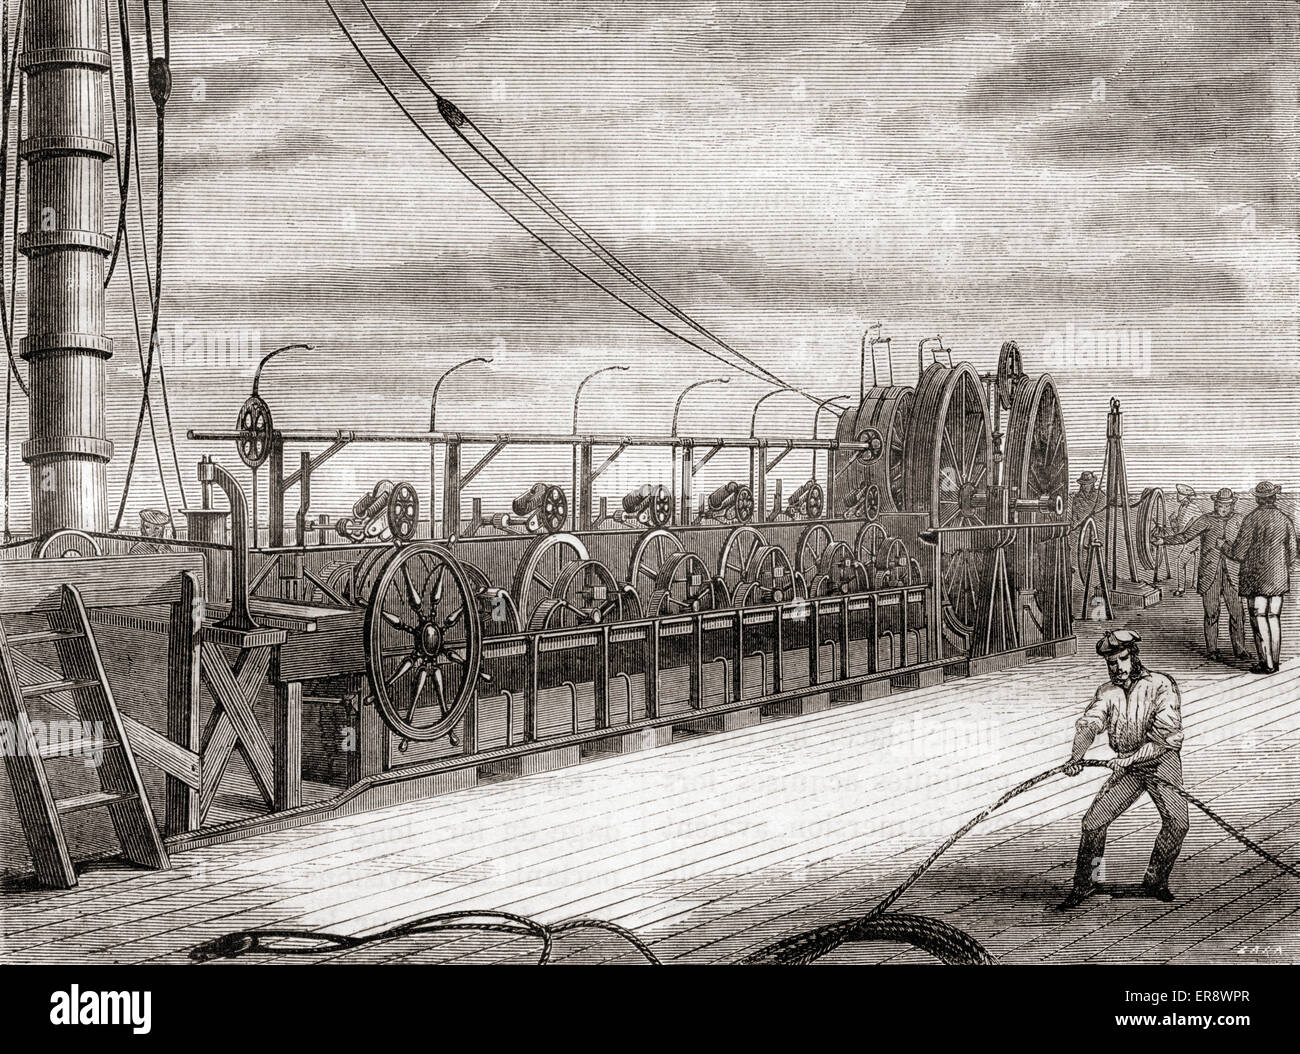 The transatlantic telegraph cable unwinding unit aboard the S.S. Great Eastern, 1865. Stock Photo